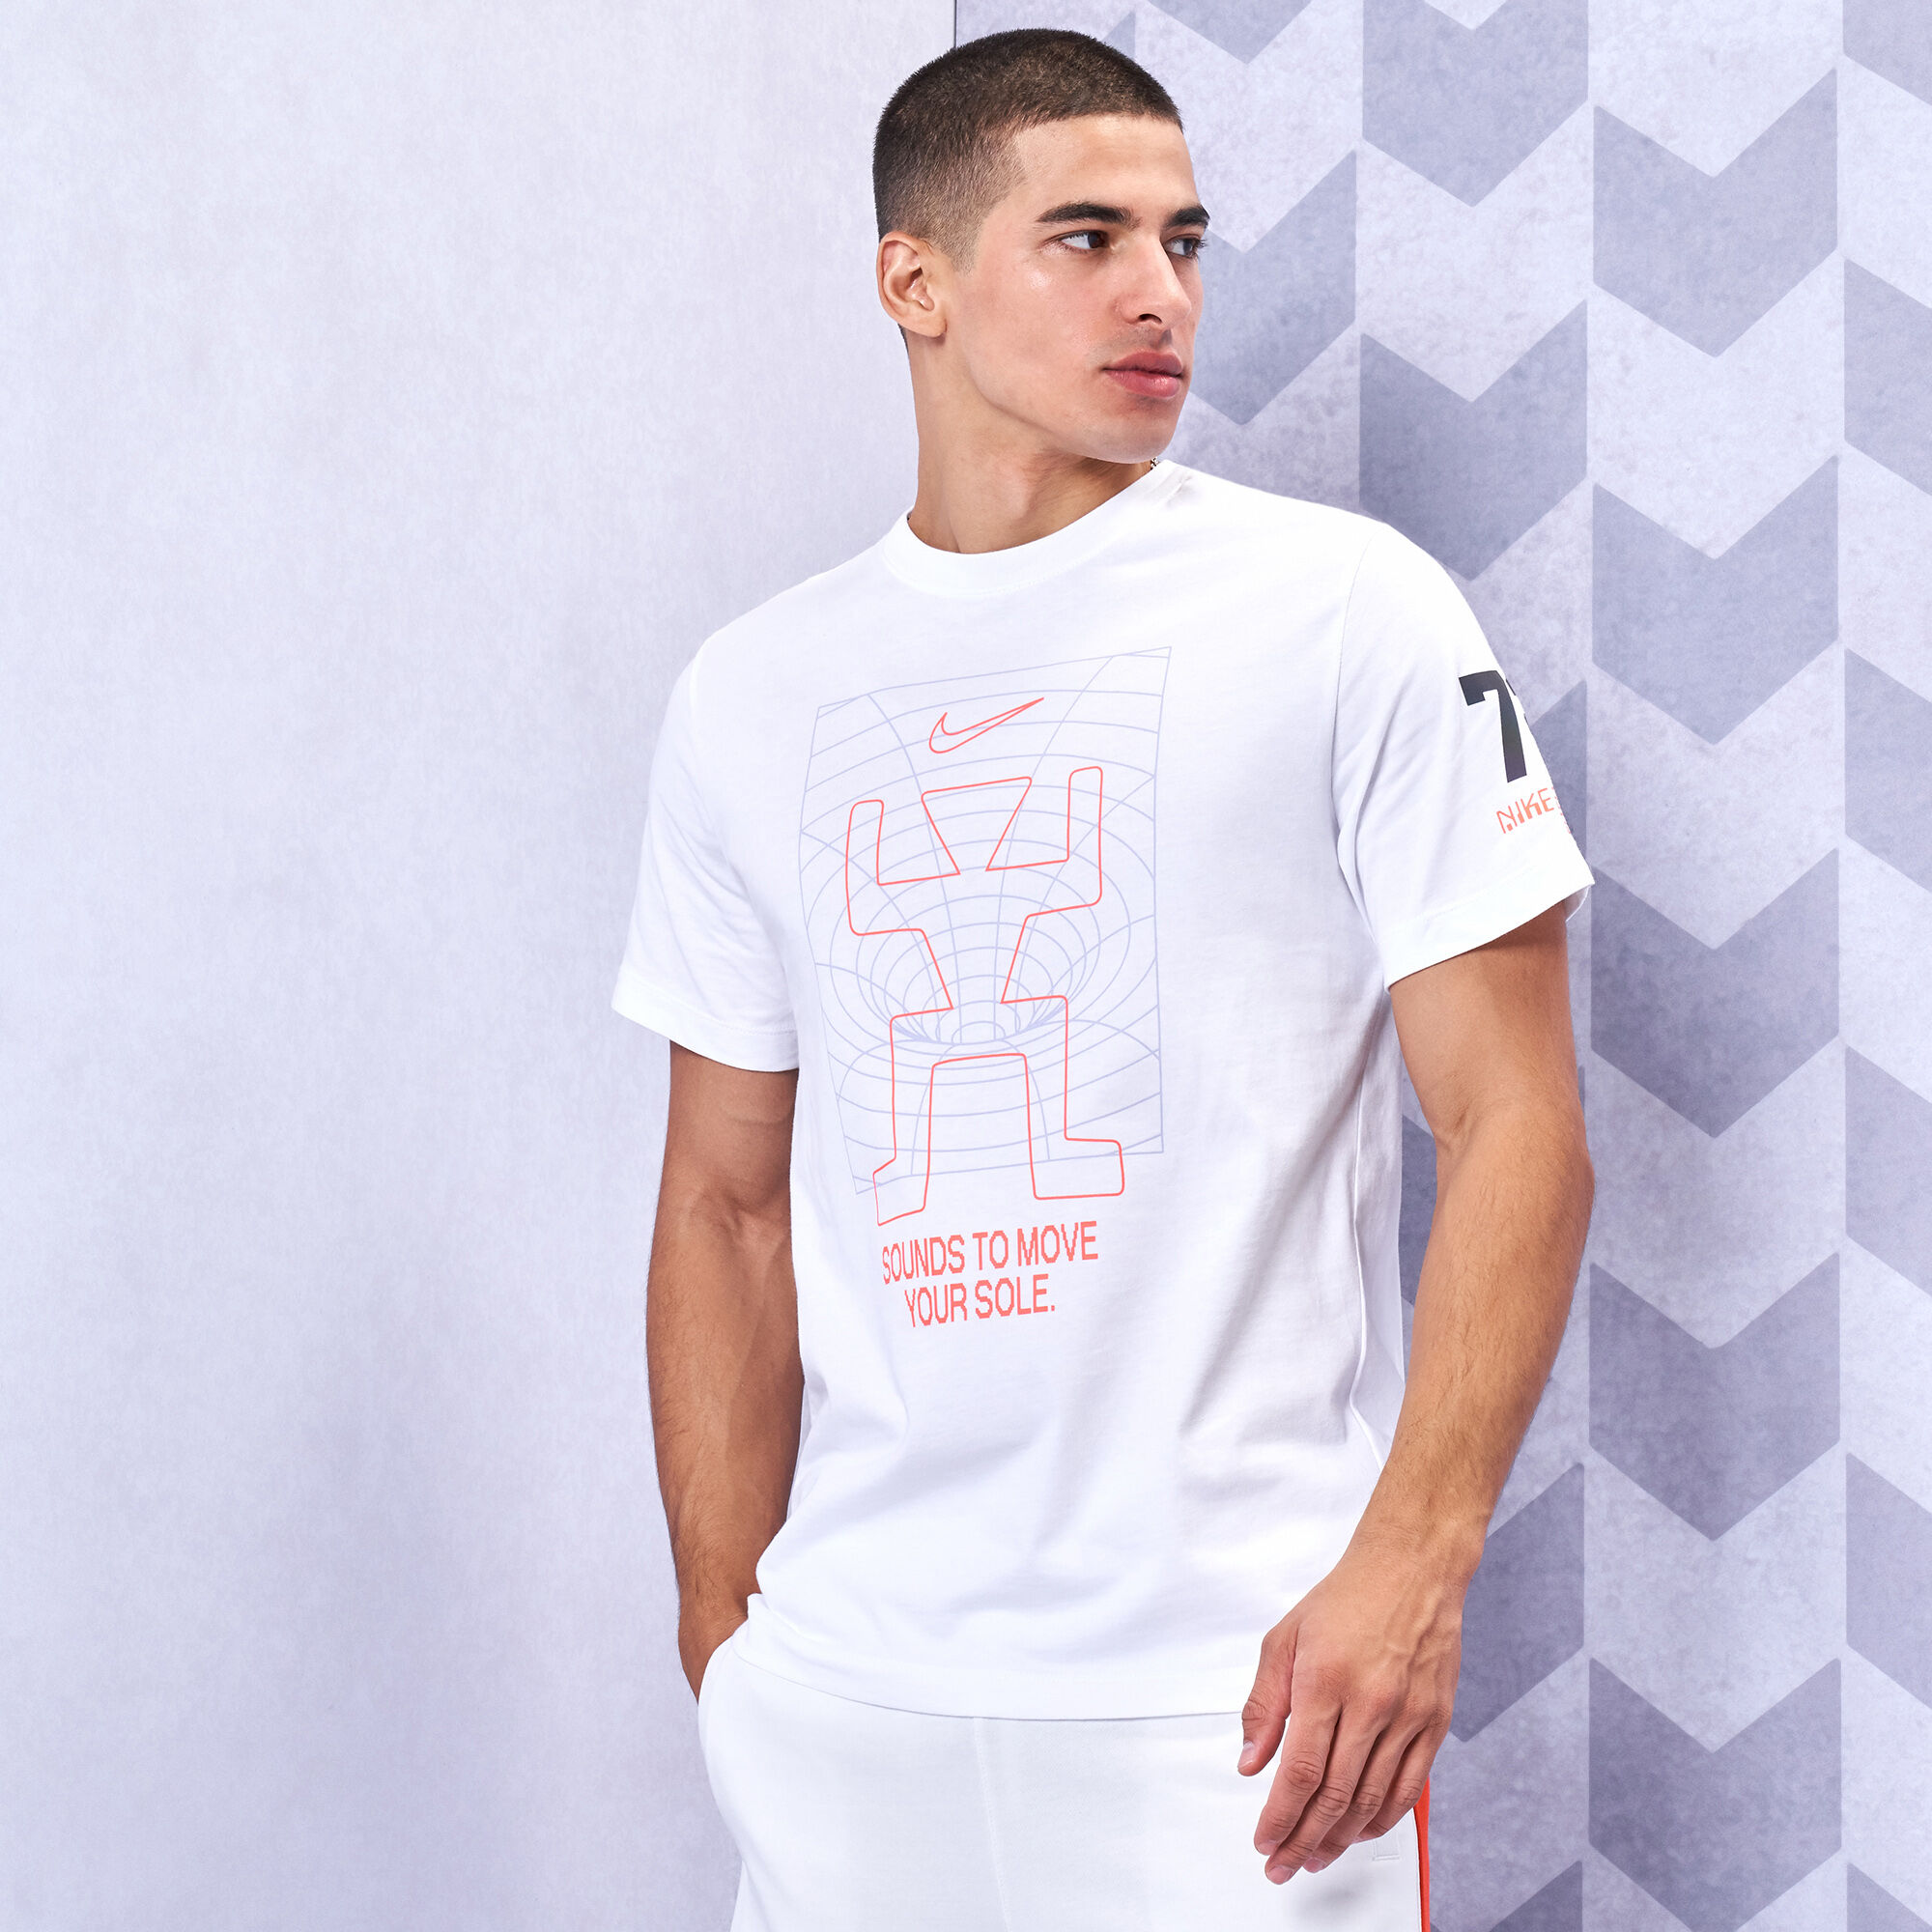 Max style, max comfort 🌟: Our Everyday Sport T-Shirt is your perfect match  for every move.